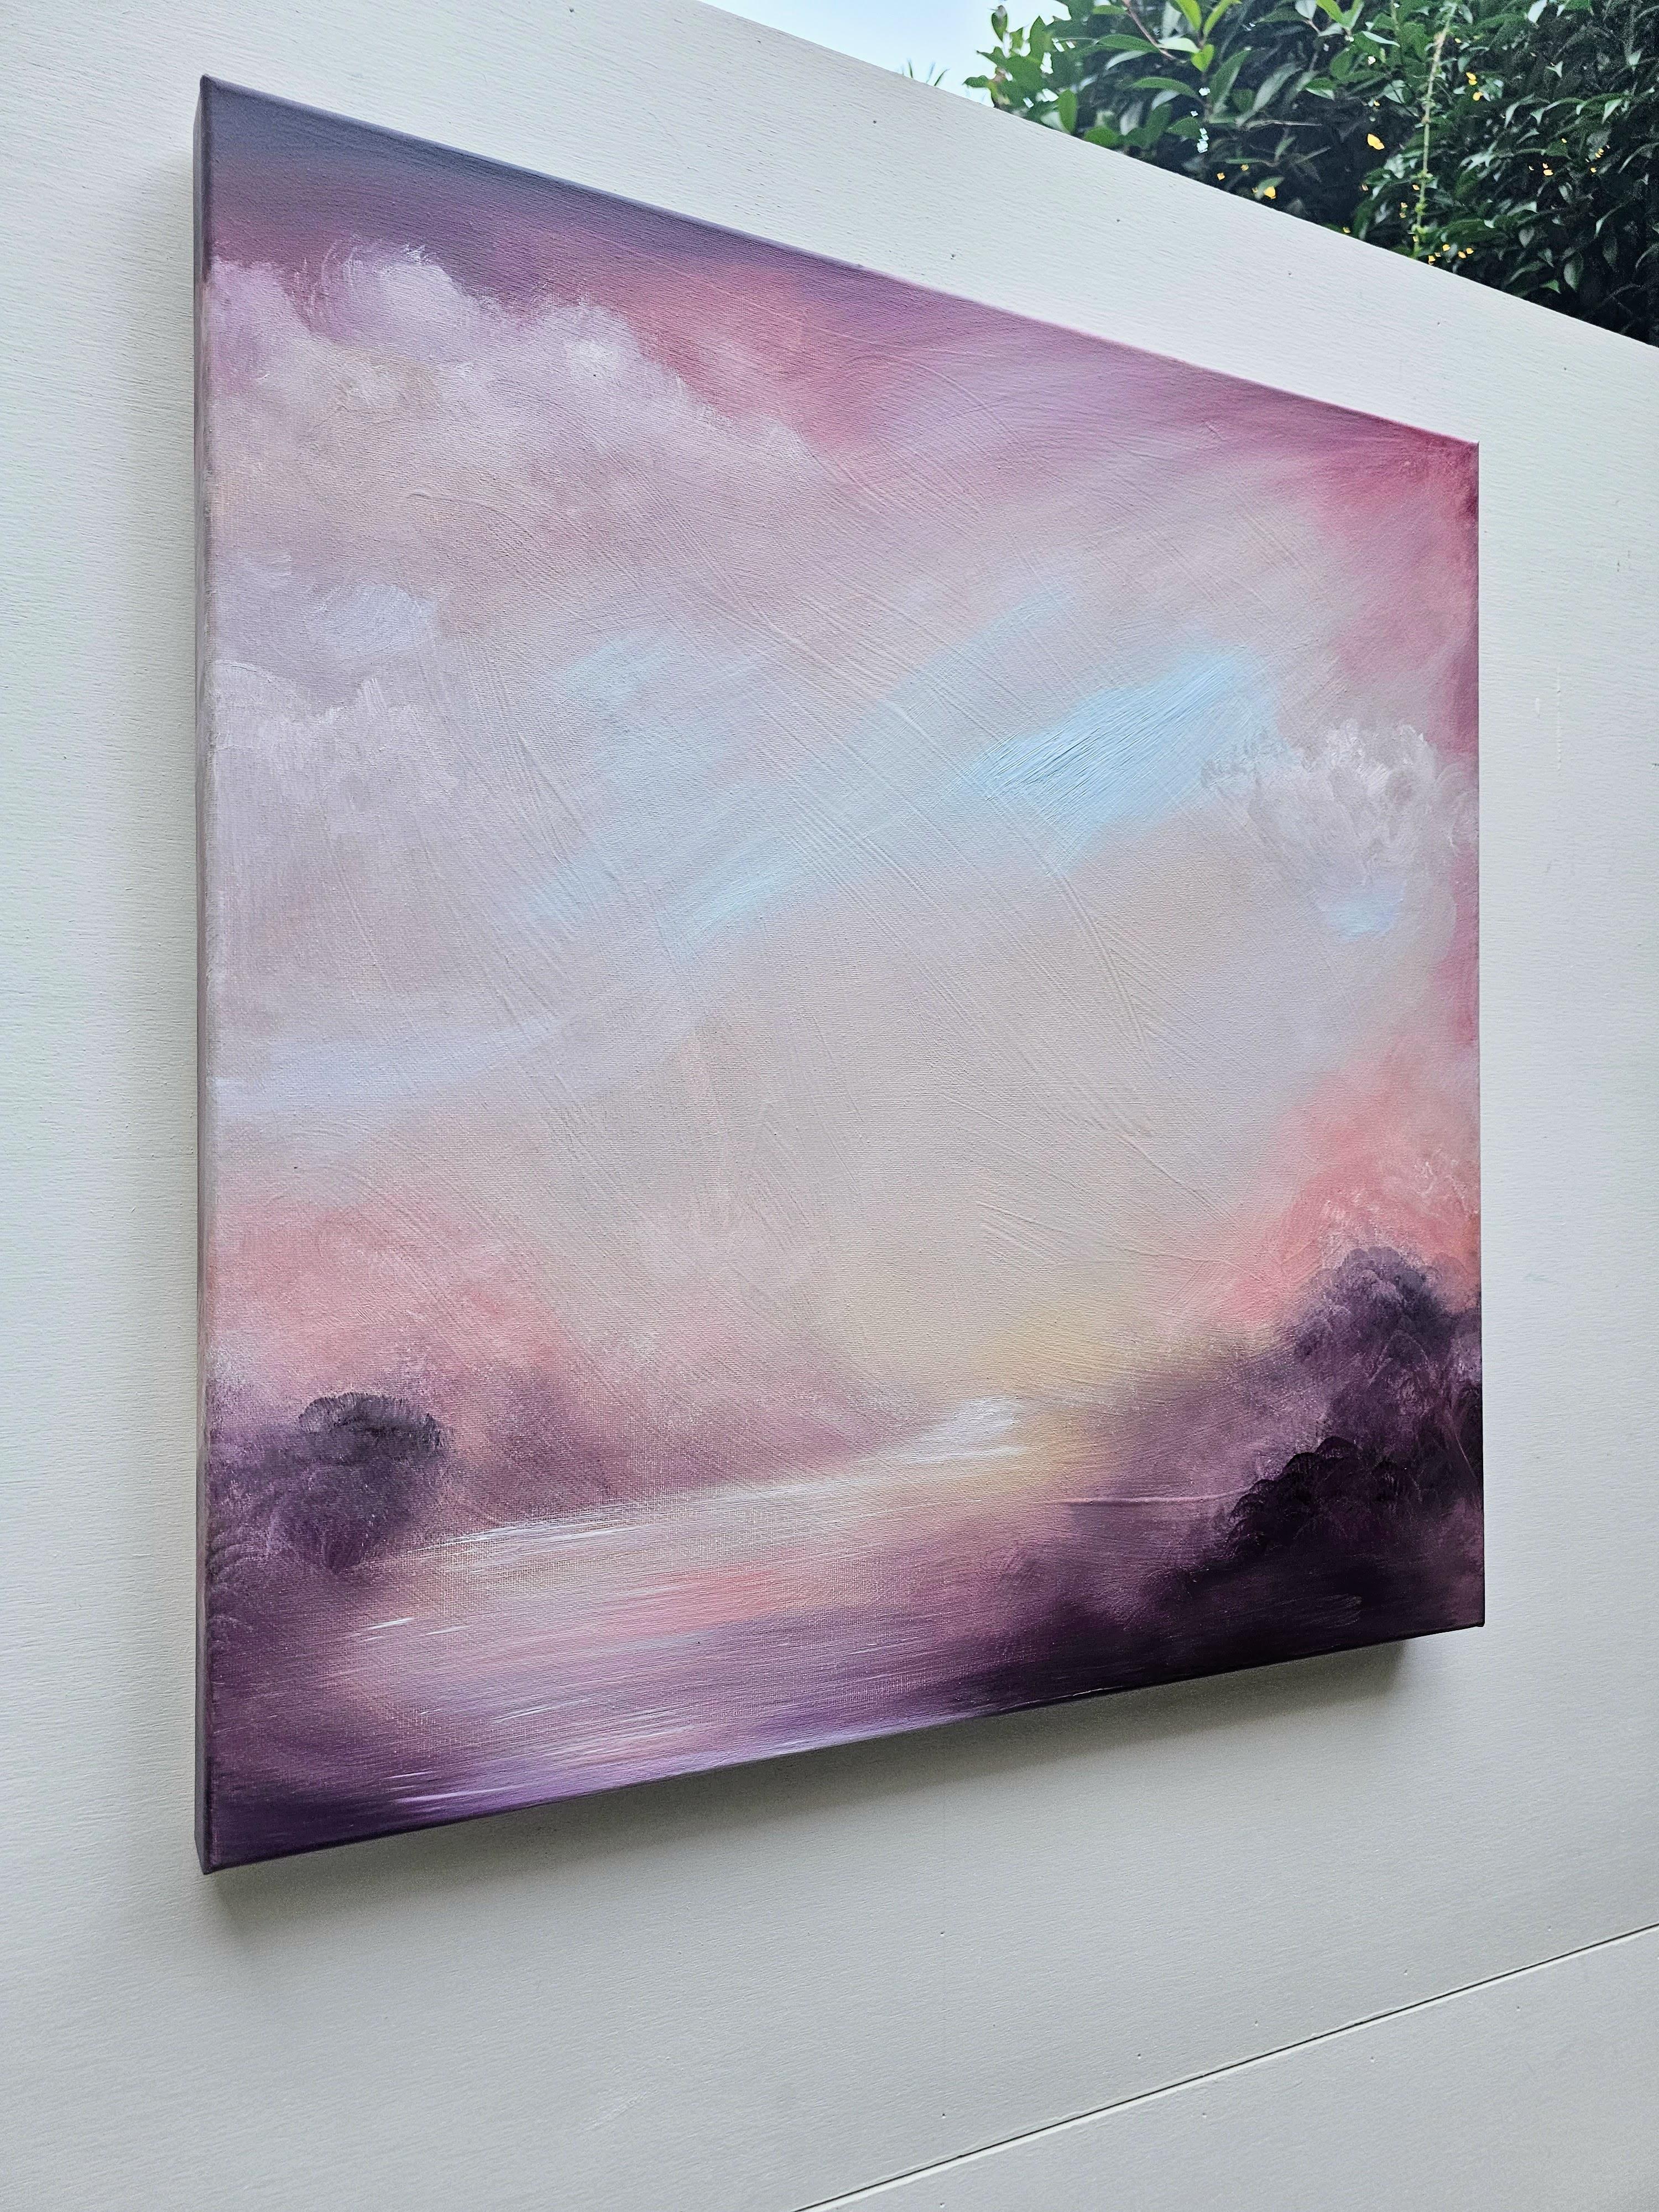 A soft abstract landscape painting, with hints of a river landscape. A warm palette, dedicated to the ascension of the sky towards the earth (sunset and dawn) and the flow of water through the landscape. A story unfolding of time, the evolution of